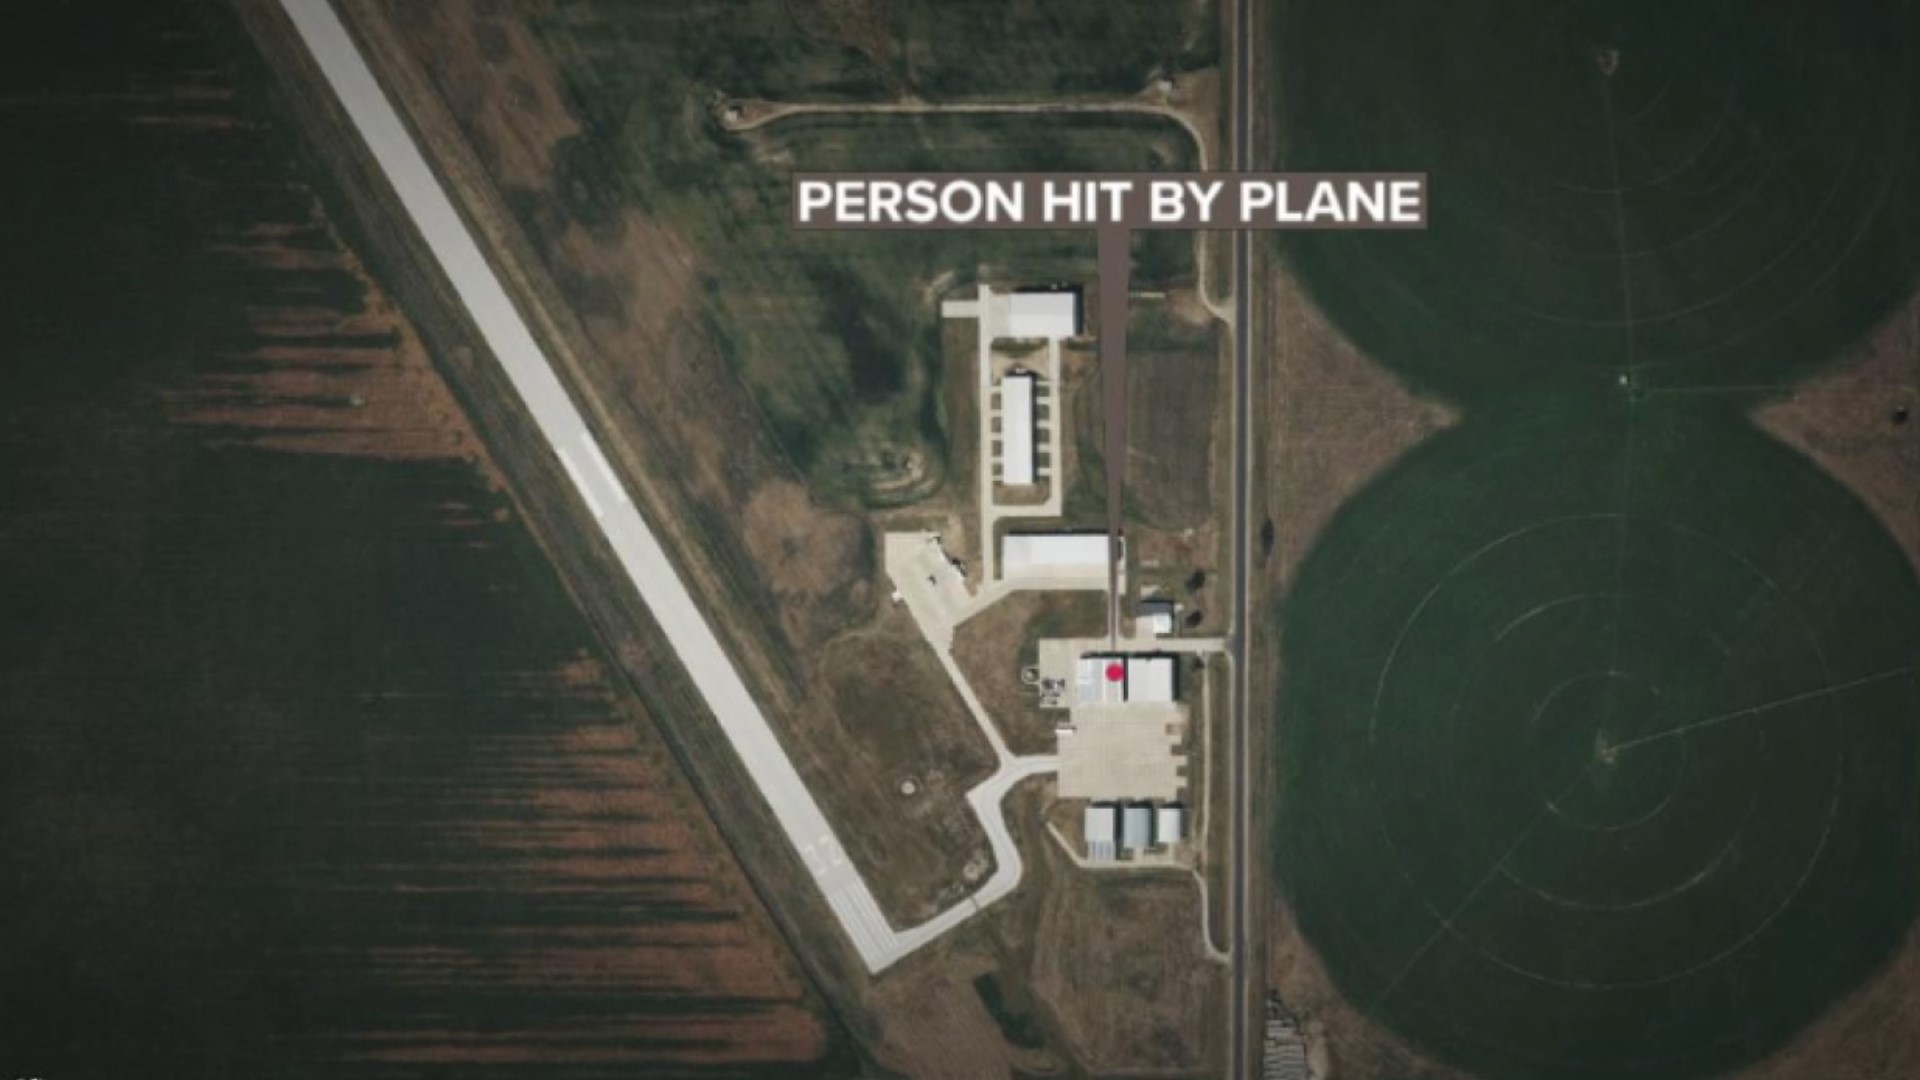 A woman on a lawn mower was hit by a plane during an emergency landing in Oklahoma.